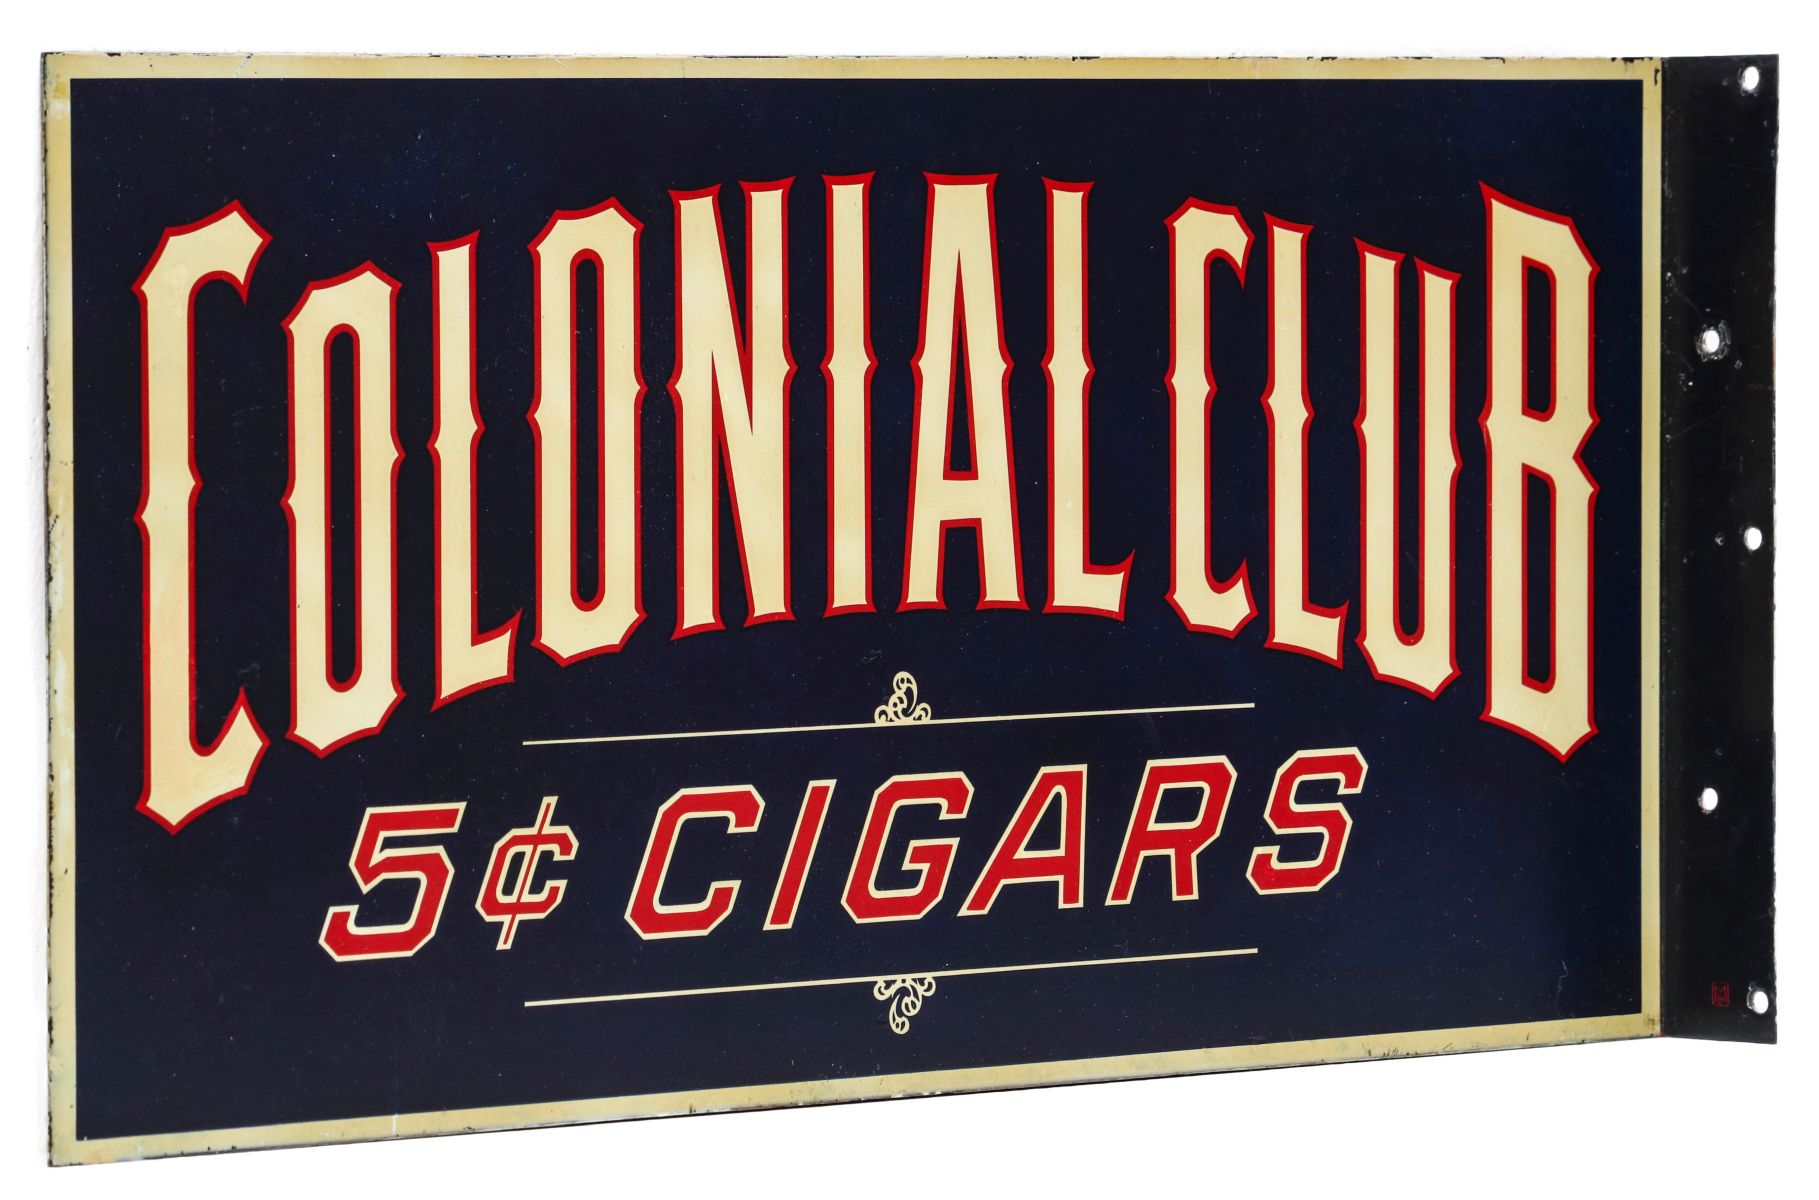 COLONIAL CLUB 5 CENT CIGARS THREE COLOR FLANGE SIGN